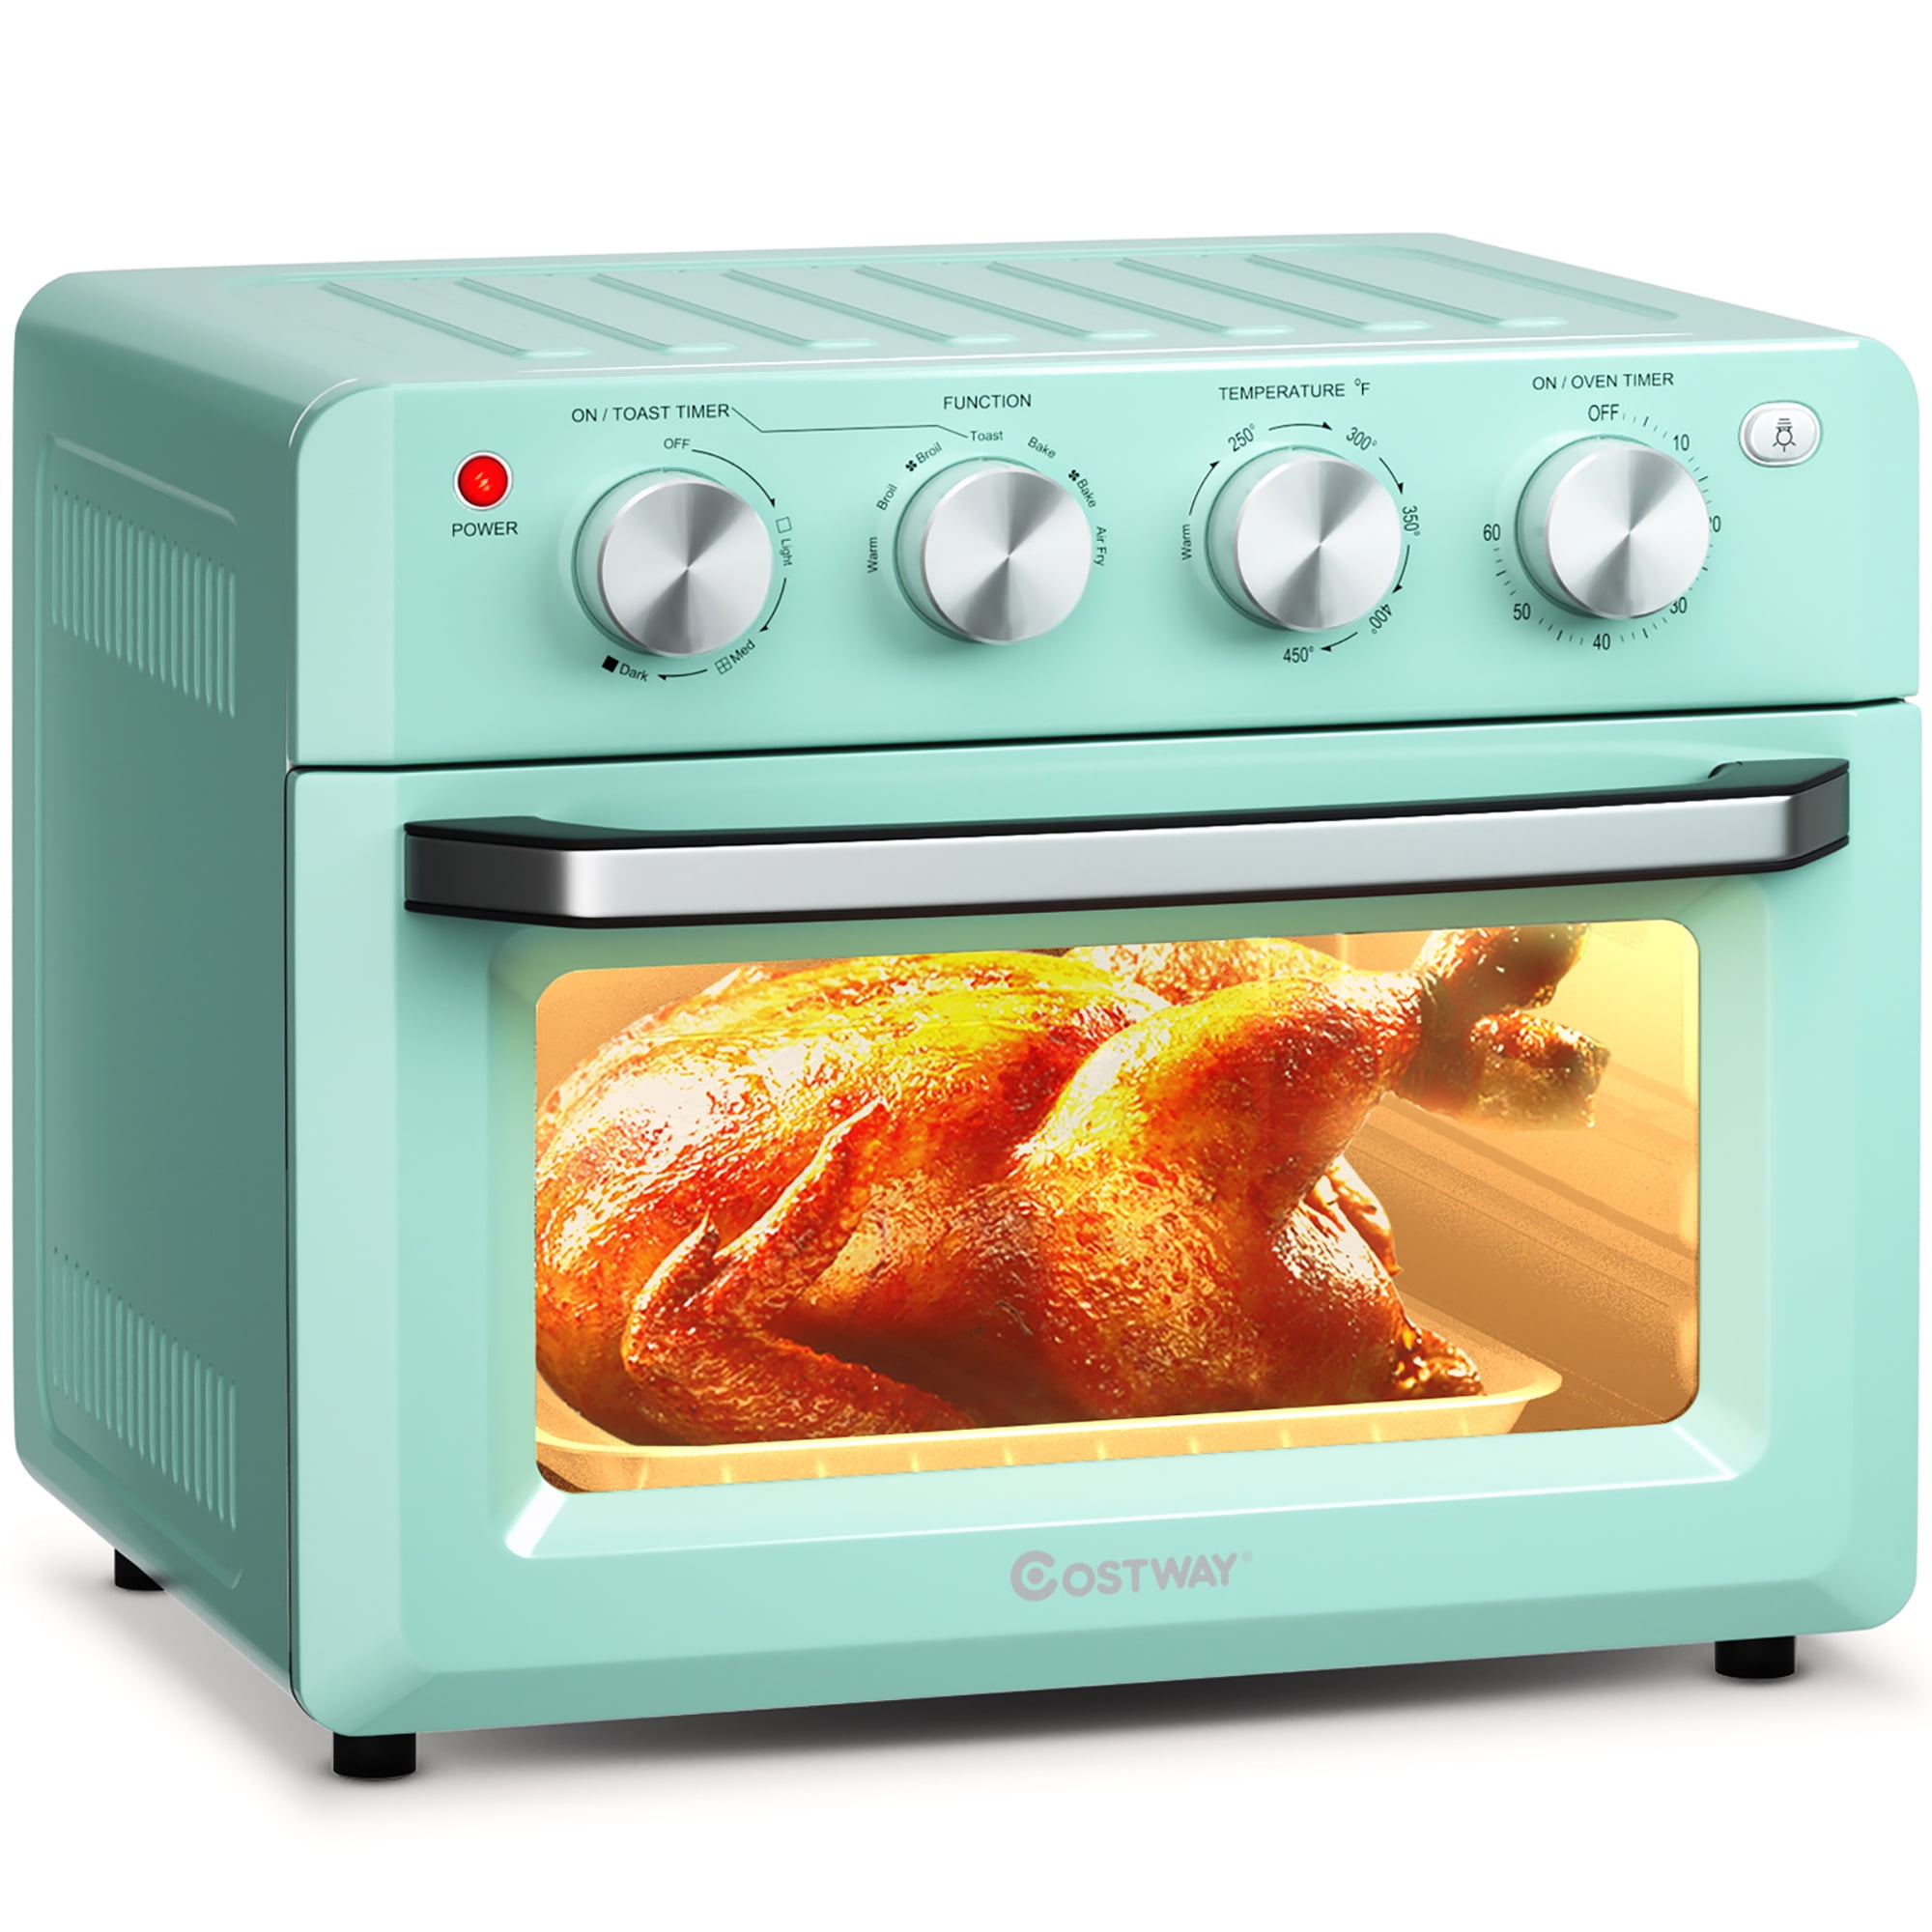 EP24760GR Costway 16-in-1 Air Fryer Oven 15.5 QT Toaster Oven Rotisserie  Dehydrator w/ Accessories Black